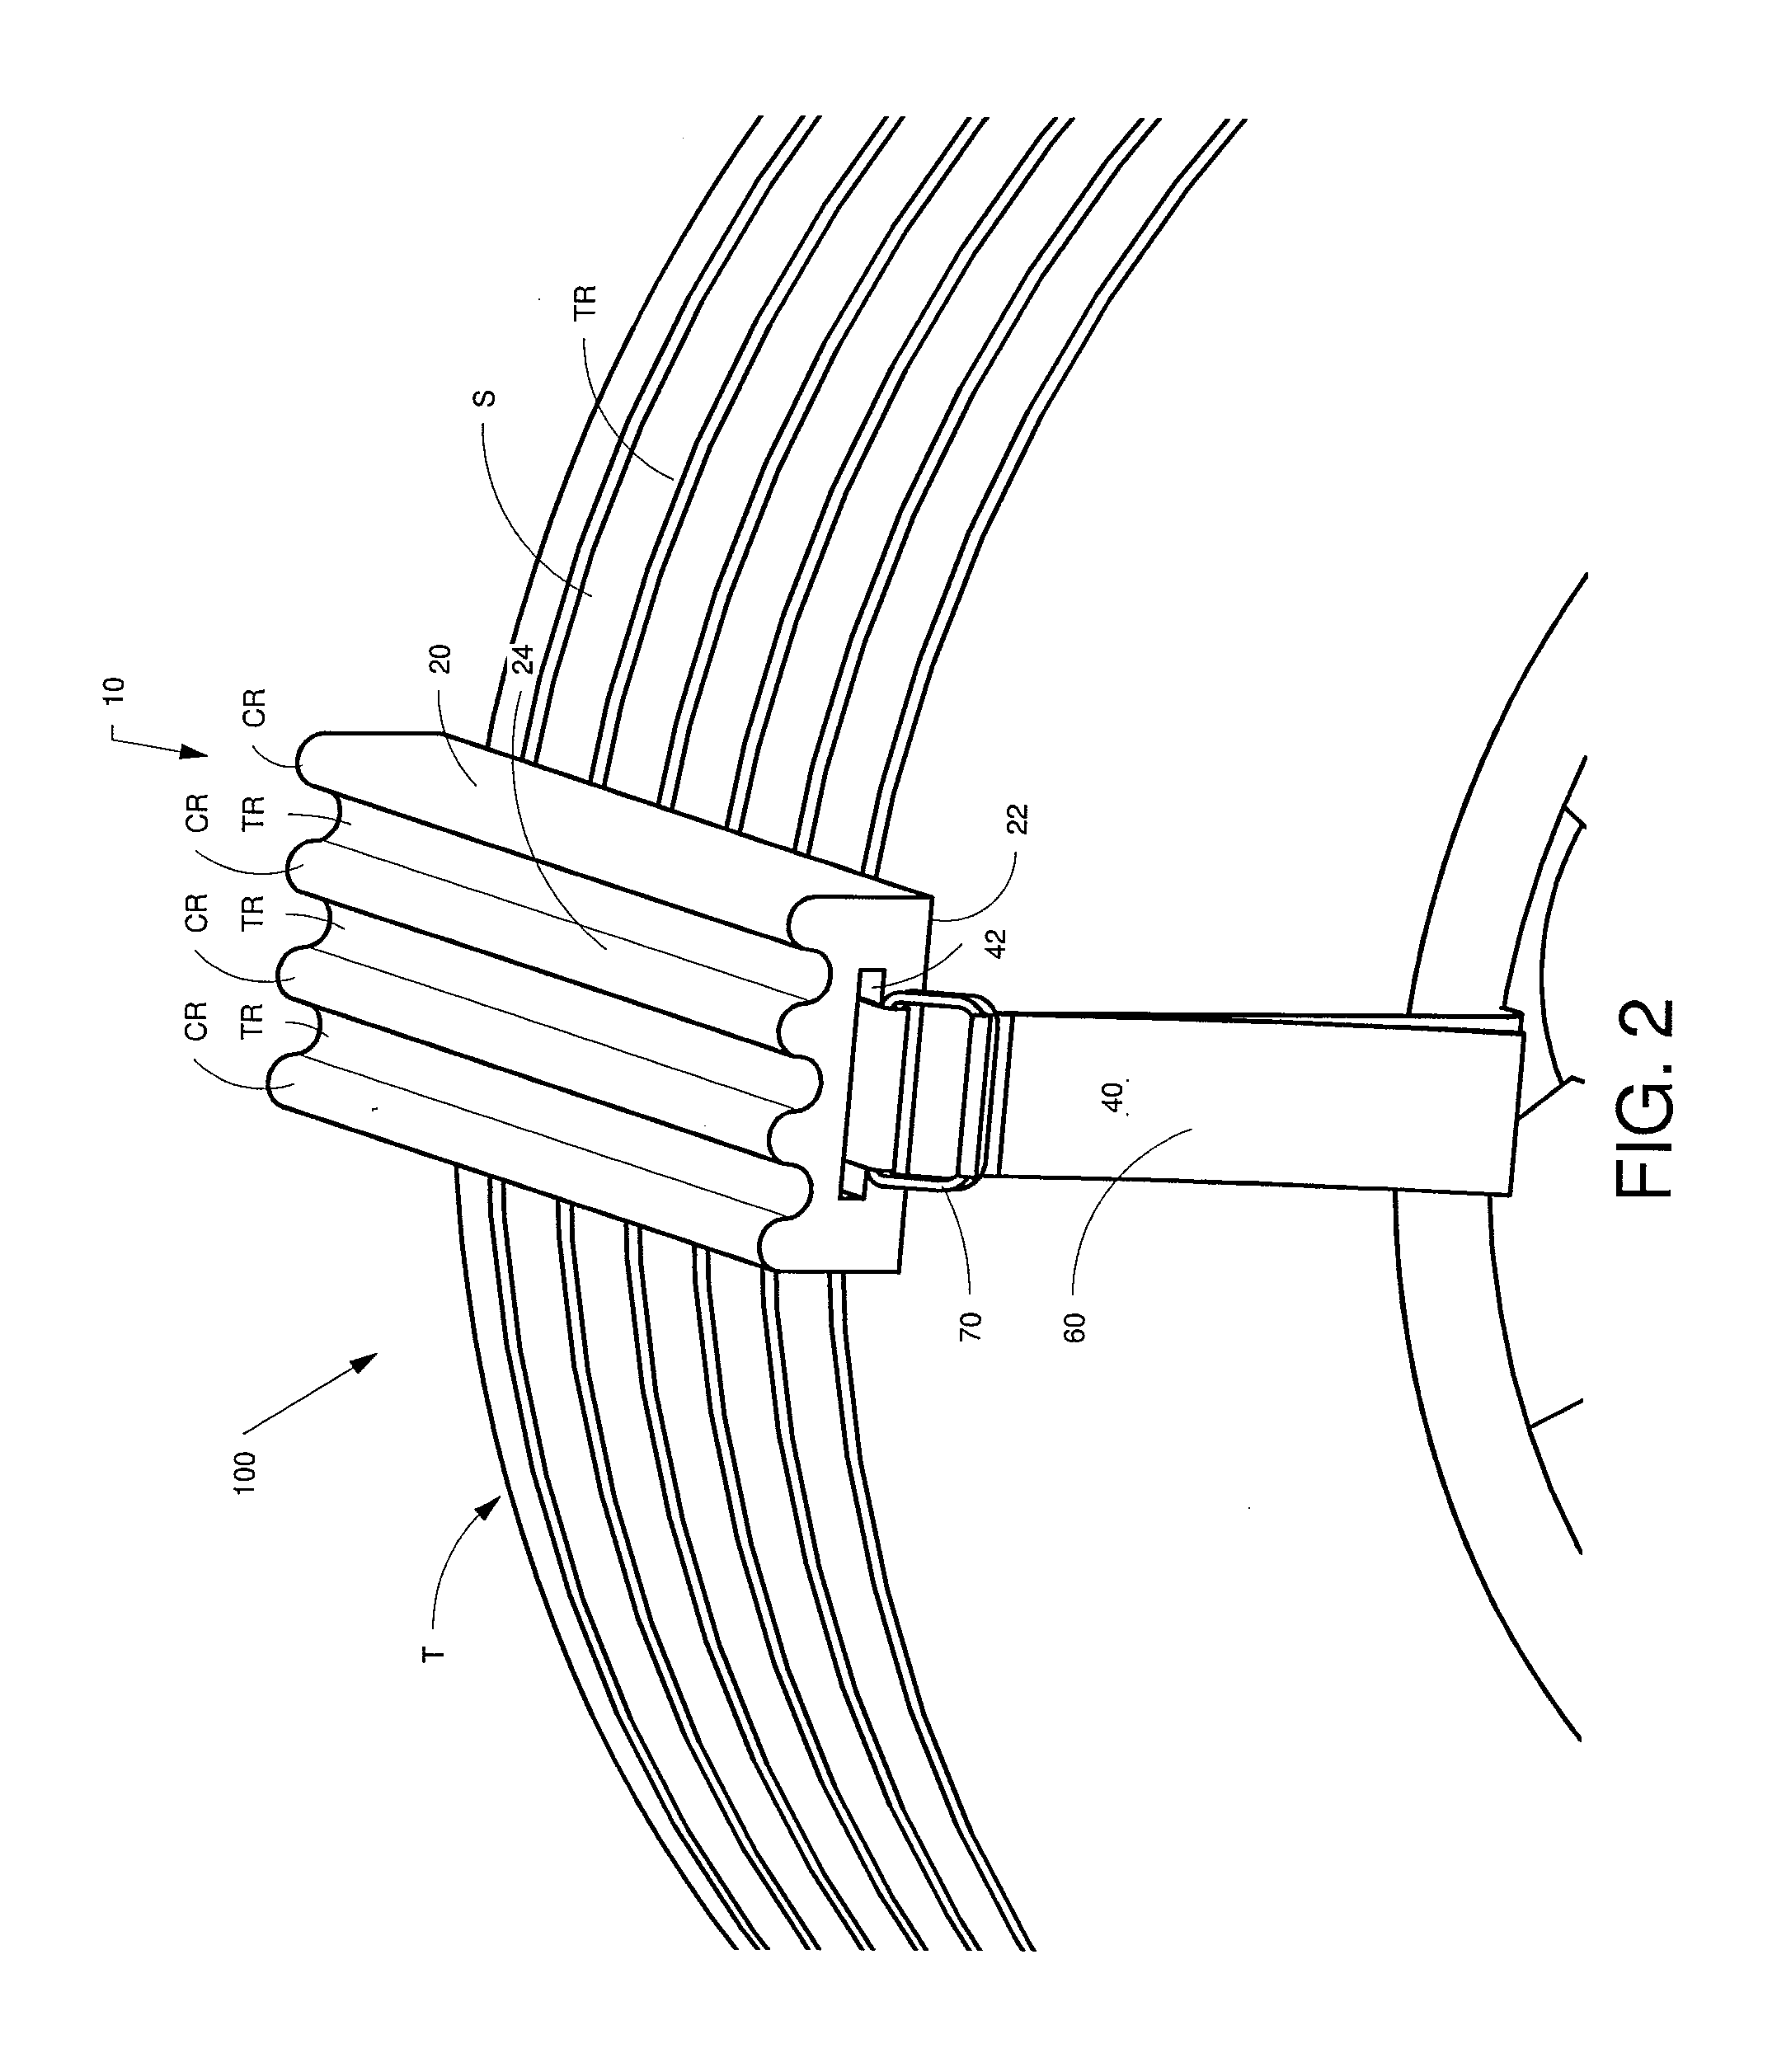 Vehicle wheel lifting block apparatus for climbing out of depression in viscous surfaces